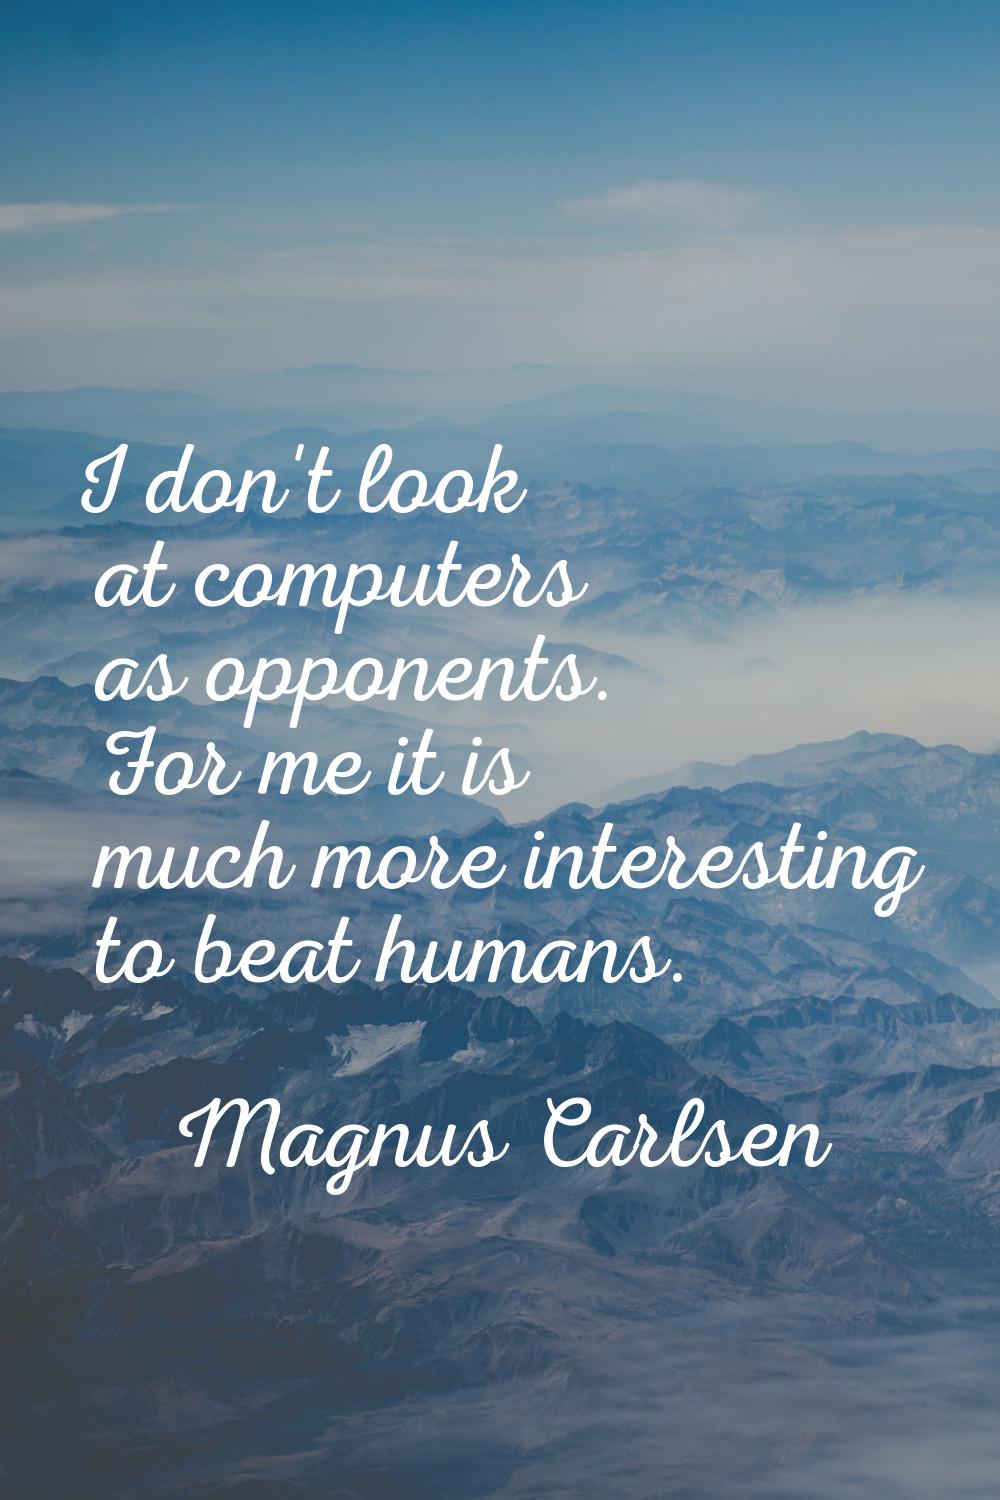 I don't look at computers as opponents. For me it is much more interesting to beat humans.